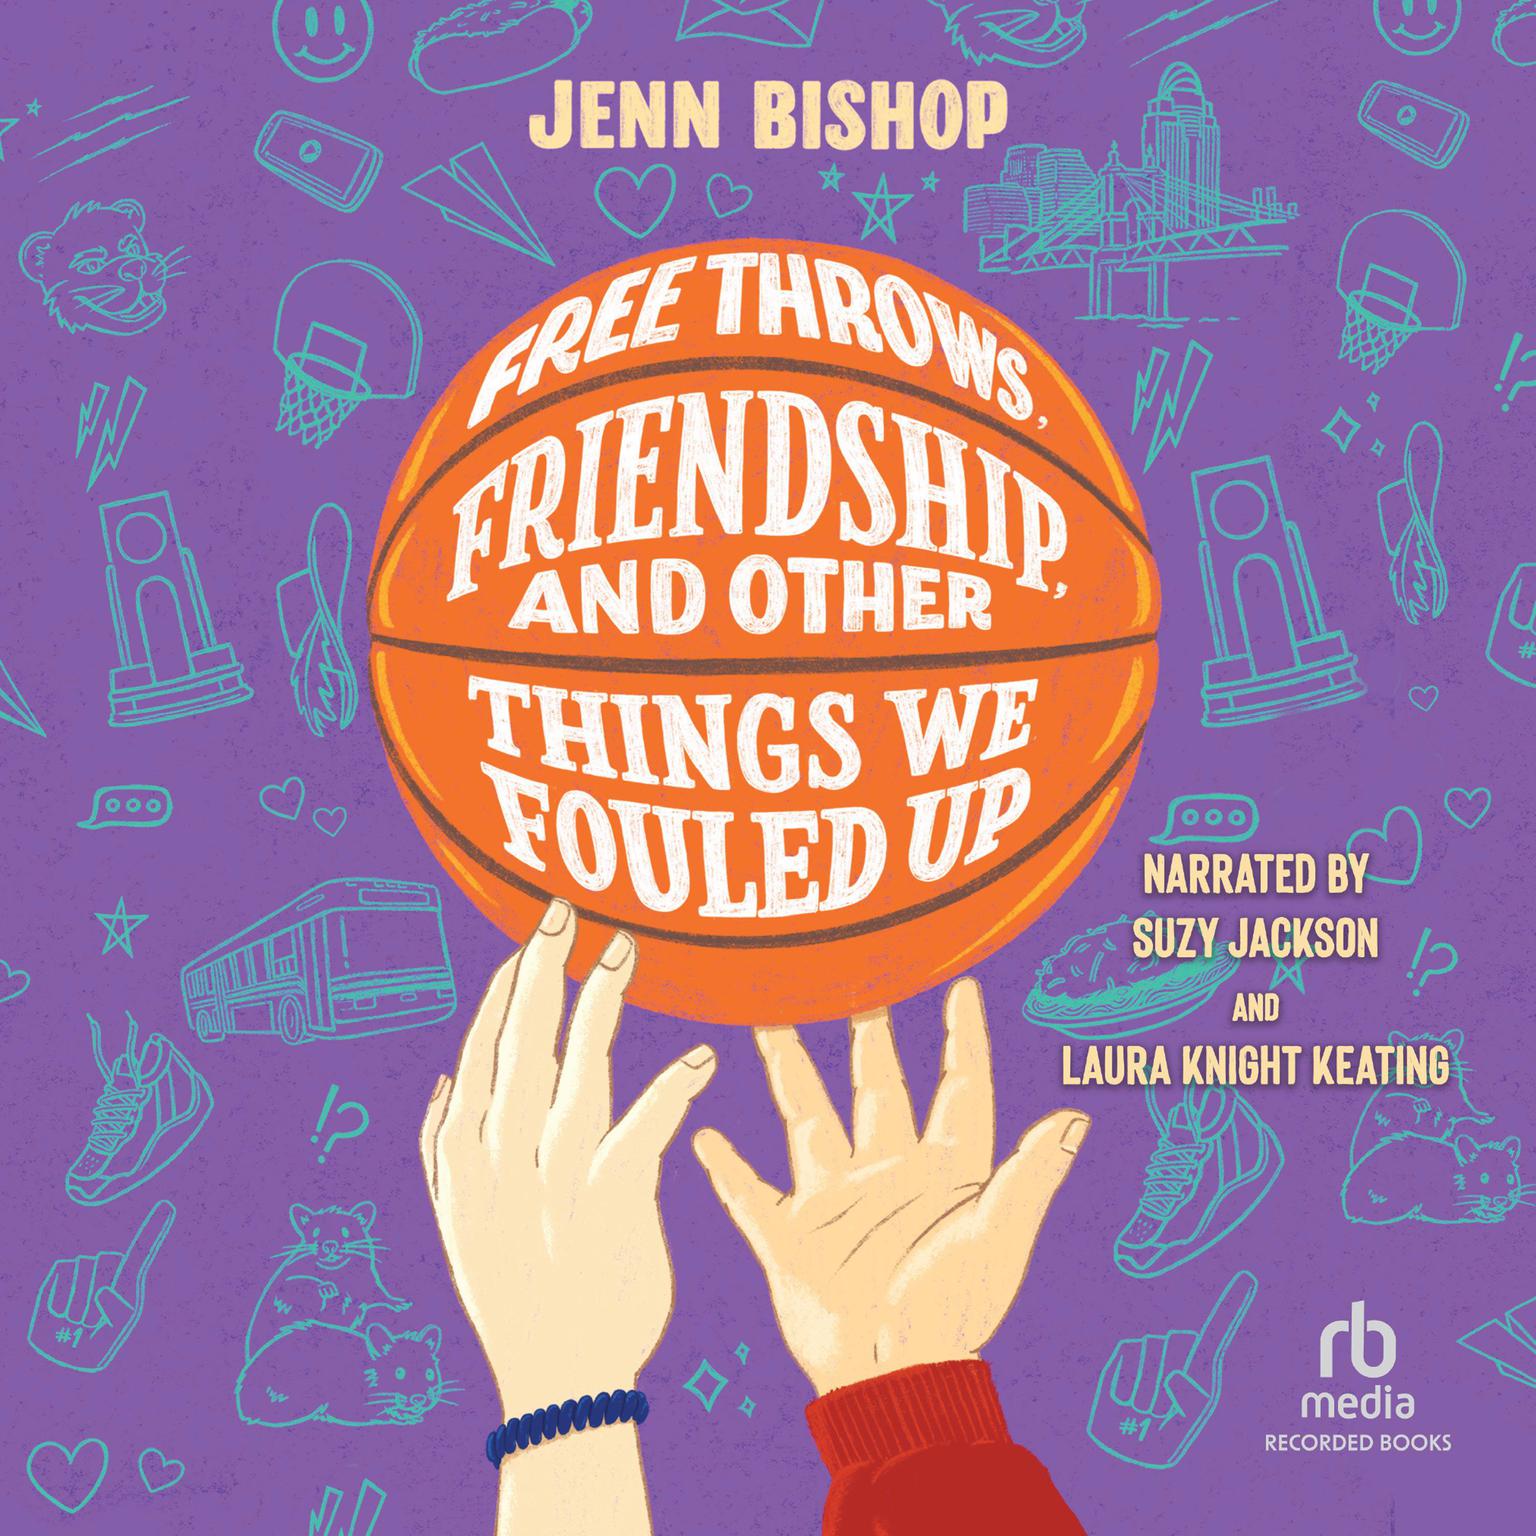 Free Throws, Friendship, and Other Things We Fouled Up Audiobook, by Jenn Bishop